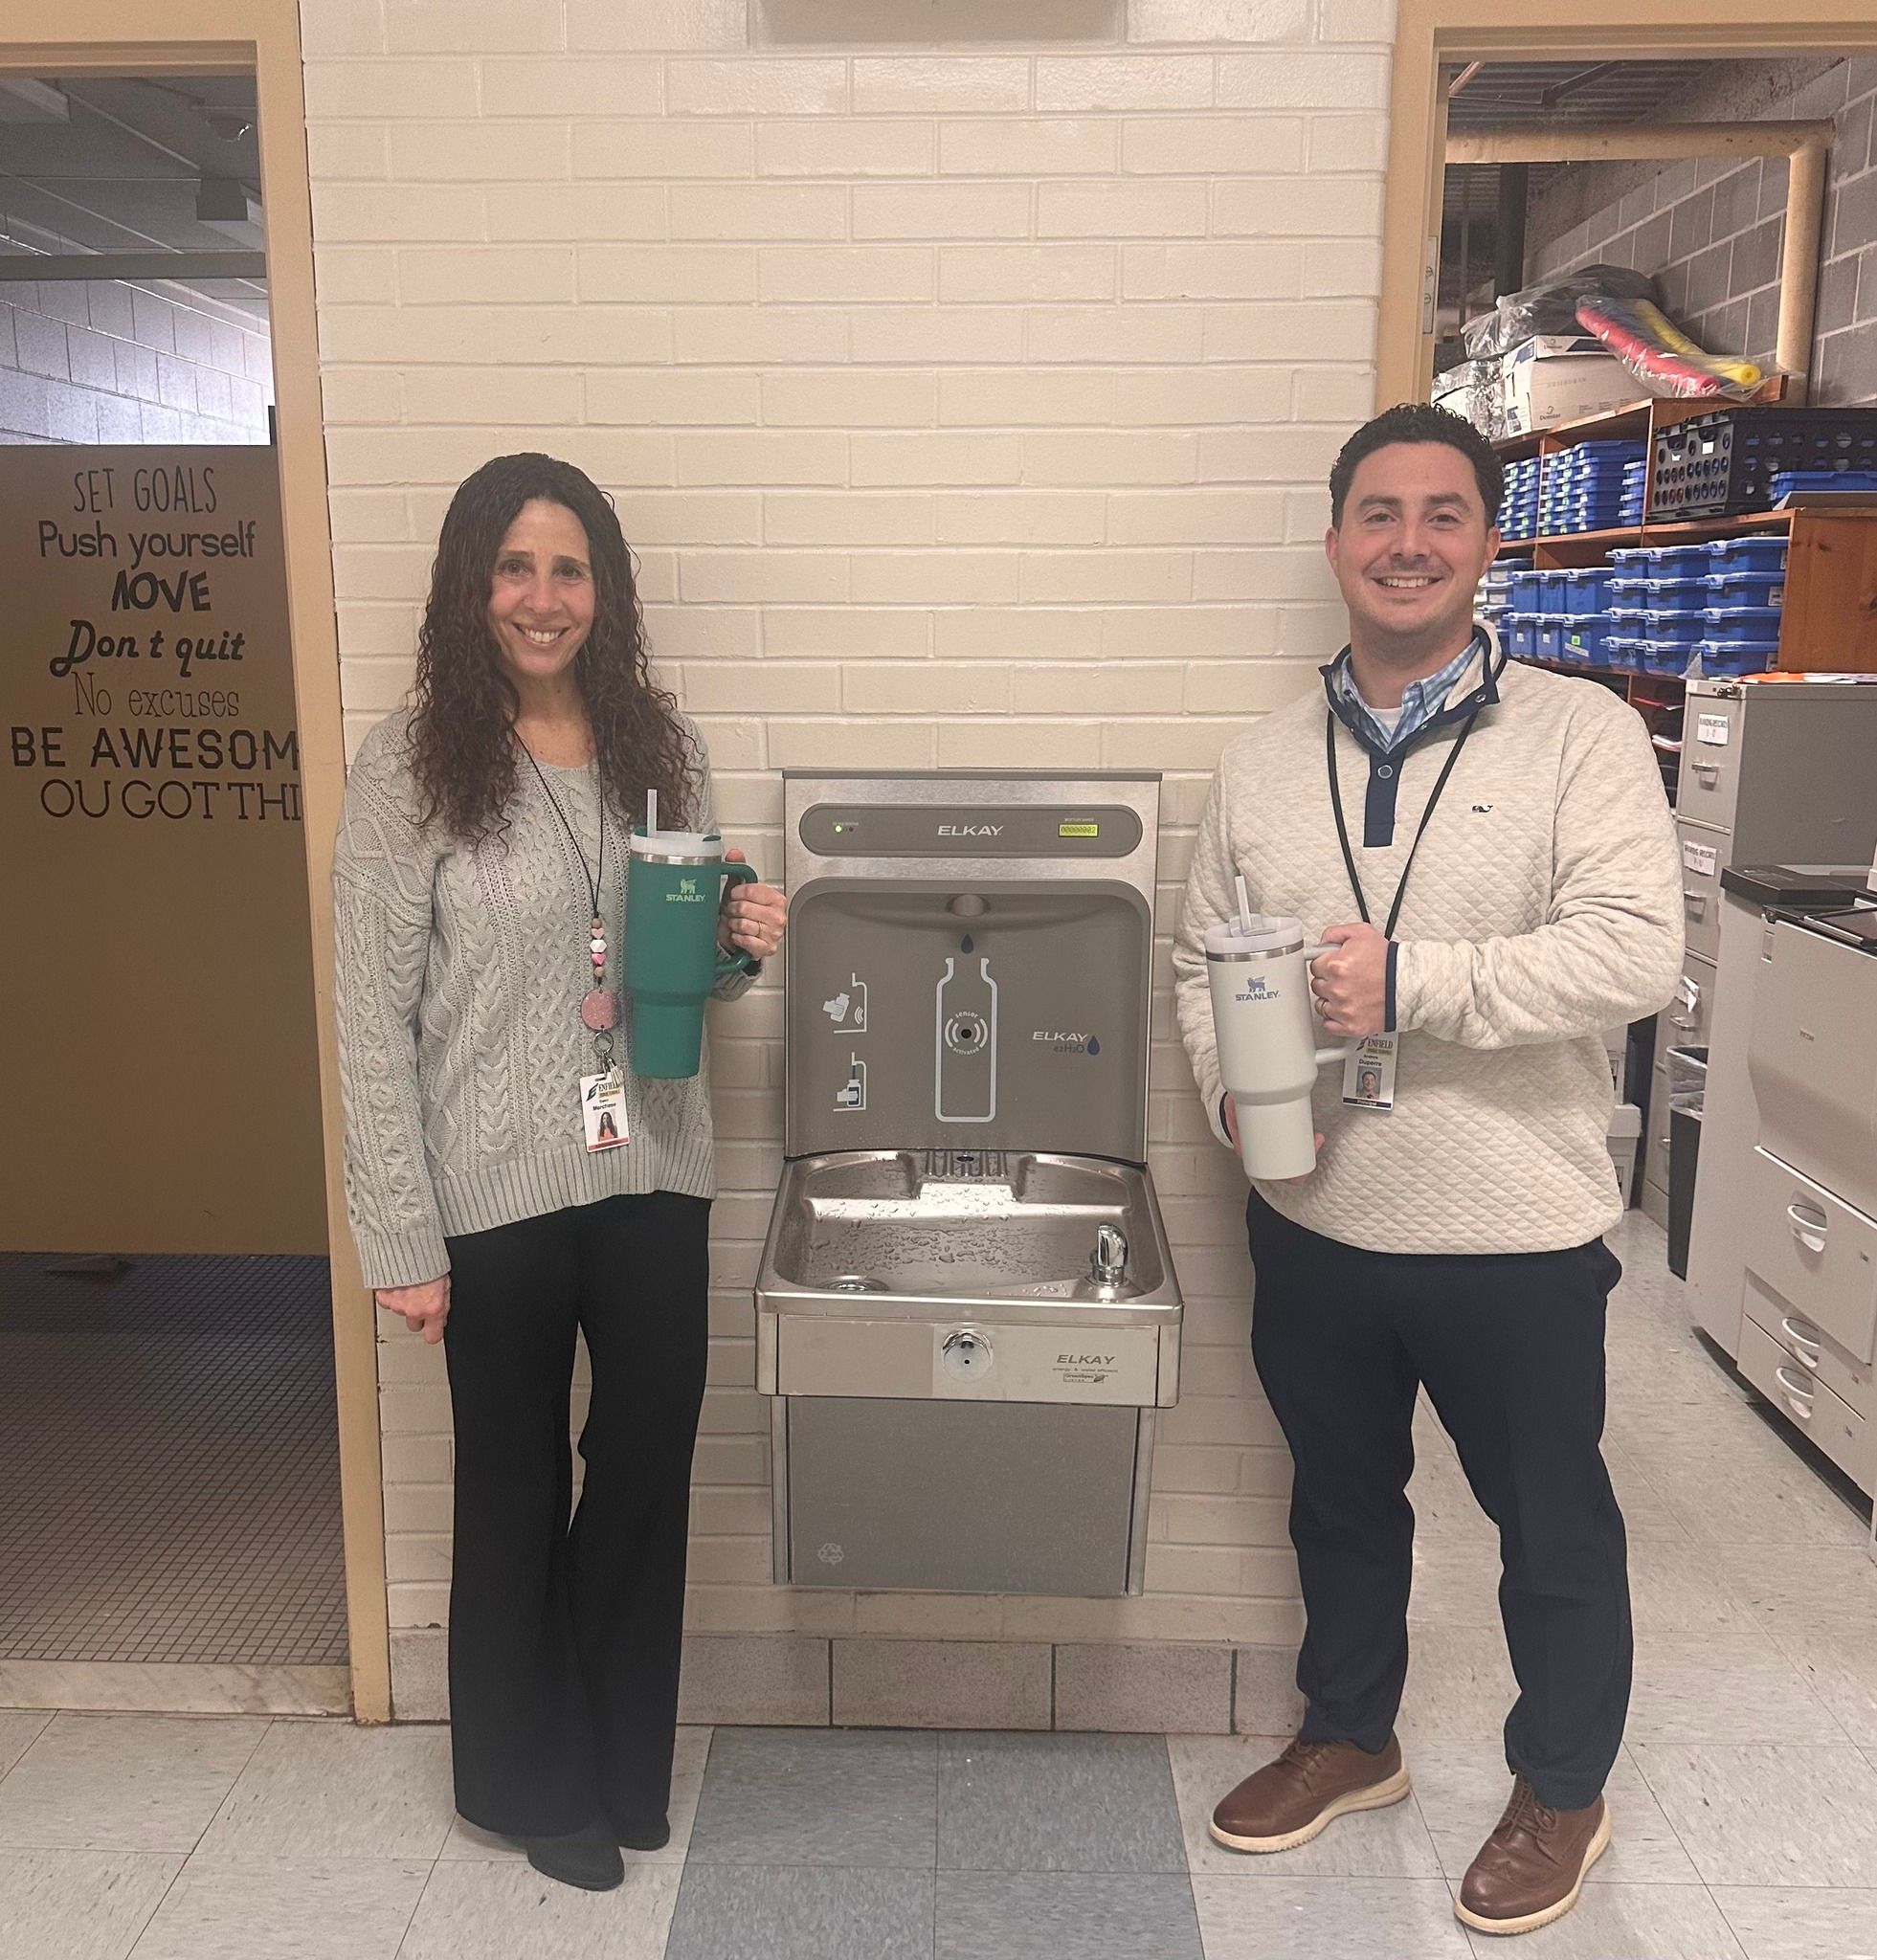 Prudence Crandall School in Enfield is enjoying their water bottle filling station provided by Connecticut Water.